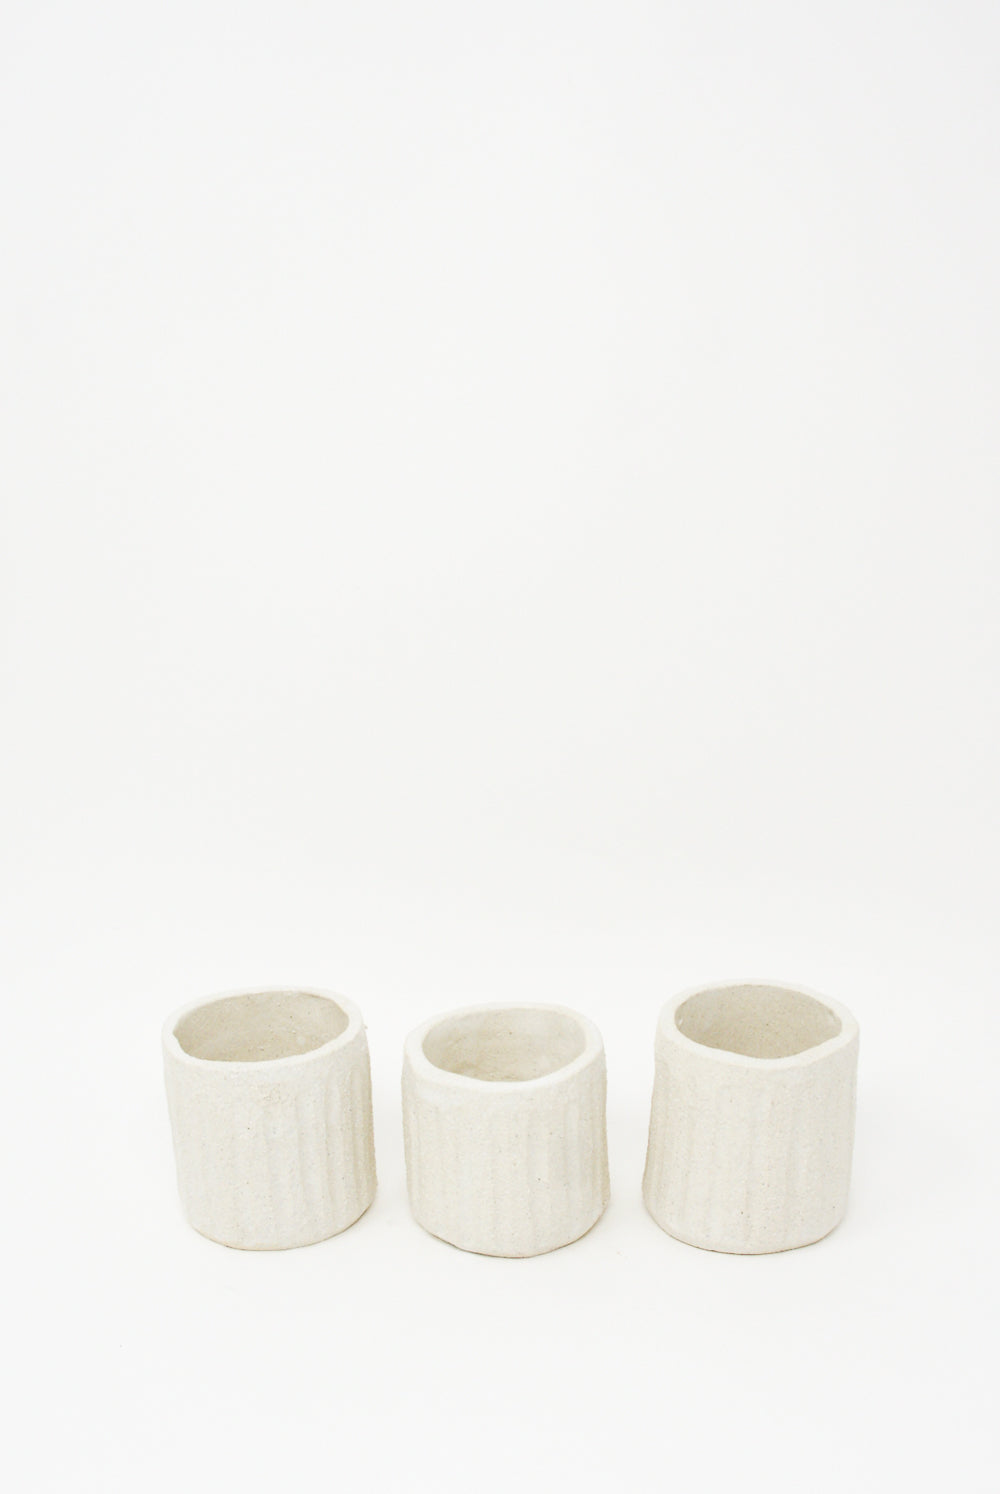 Three Clandestine Tea Cups in Natural on a white surface.